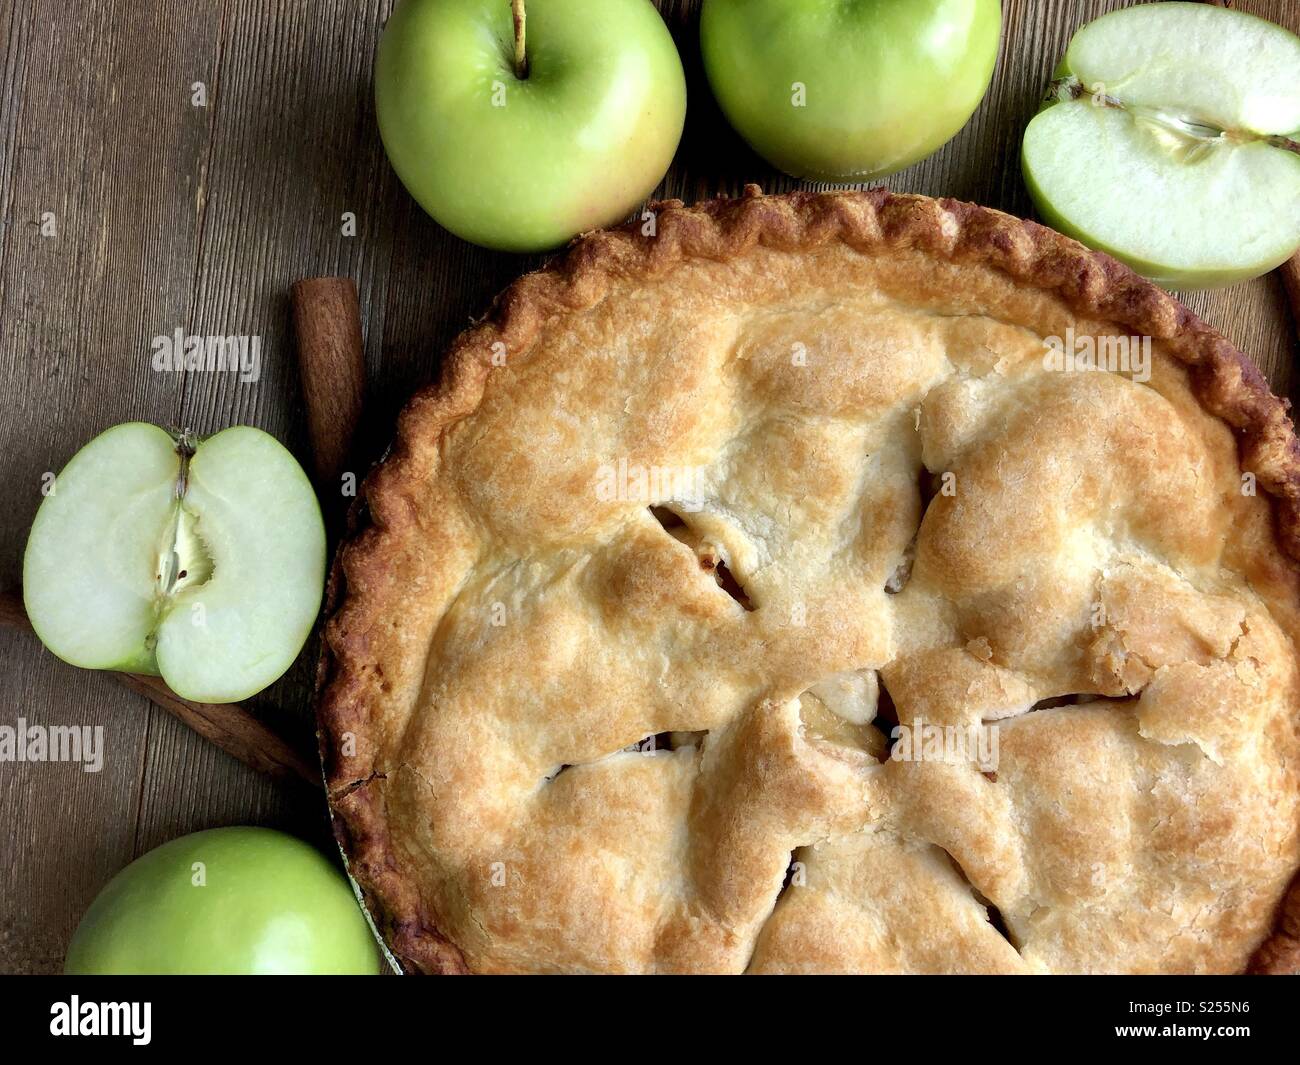 Apple pie on a wooden surface Stock Photo